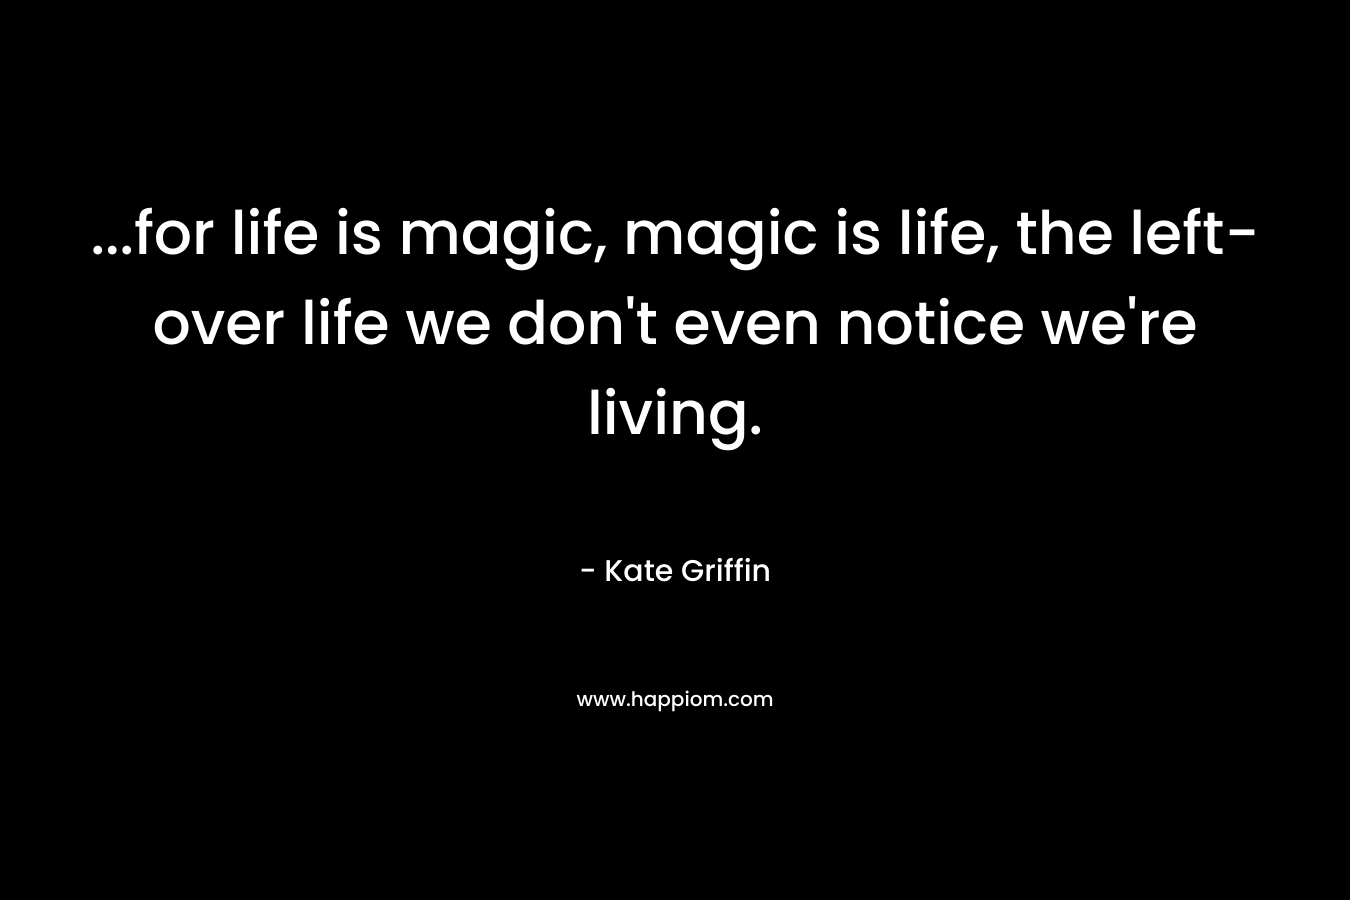 …for life is magic, magic is life, the left-over life we don’t even notice we’re living. – Kate Griffin